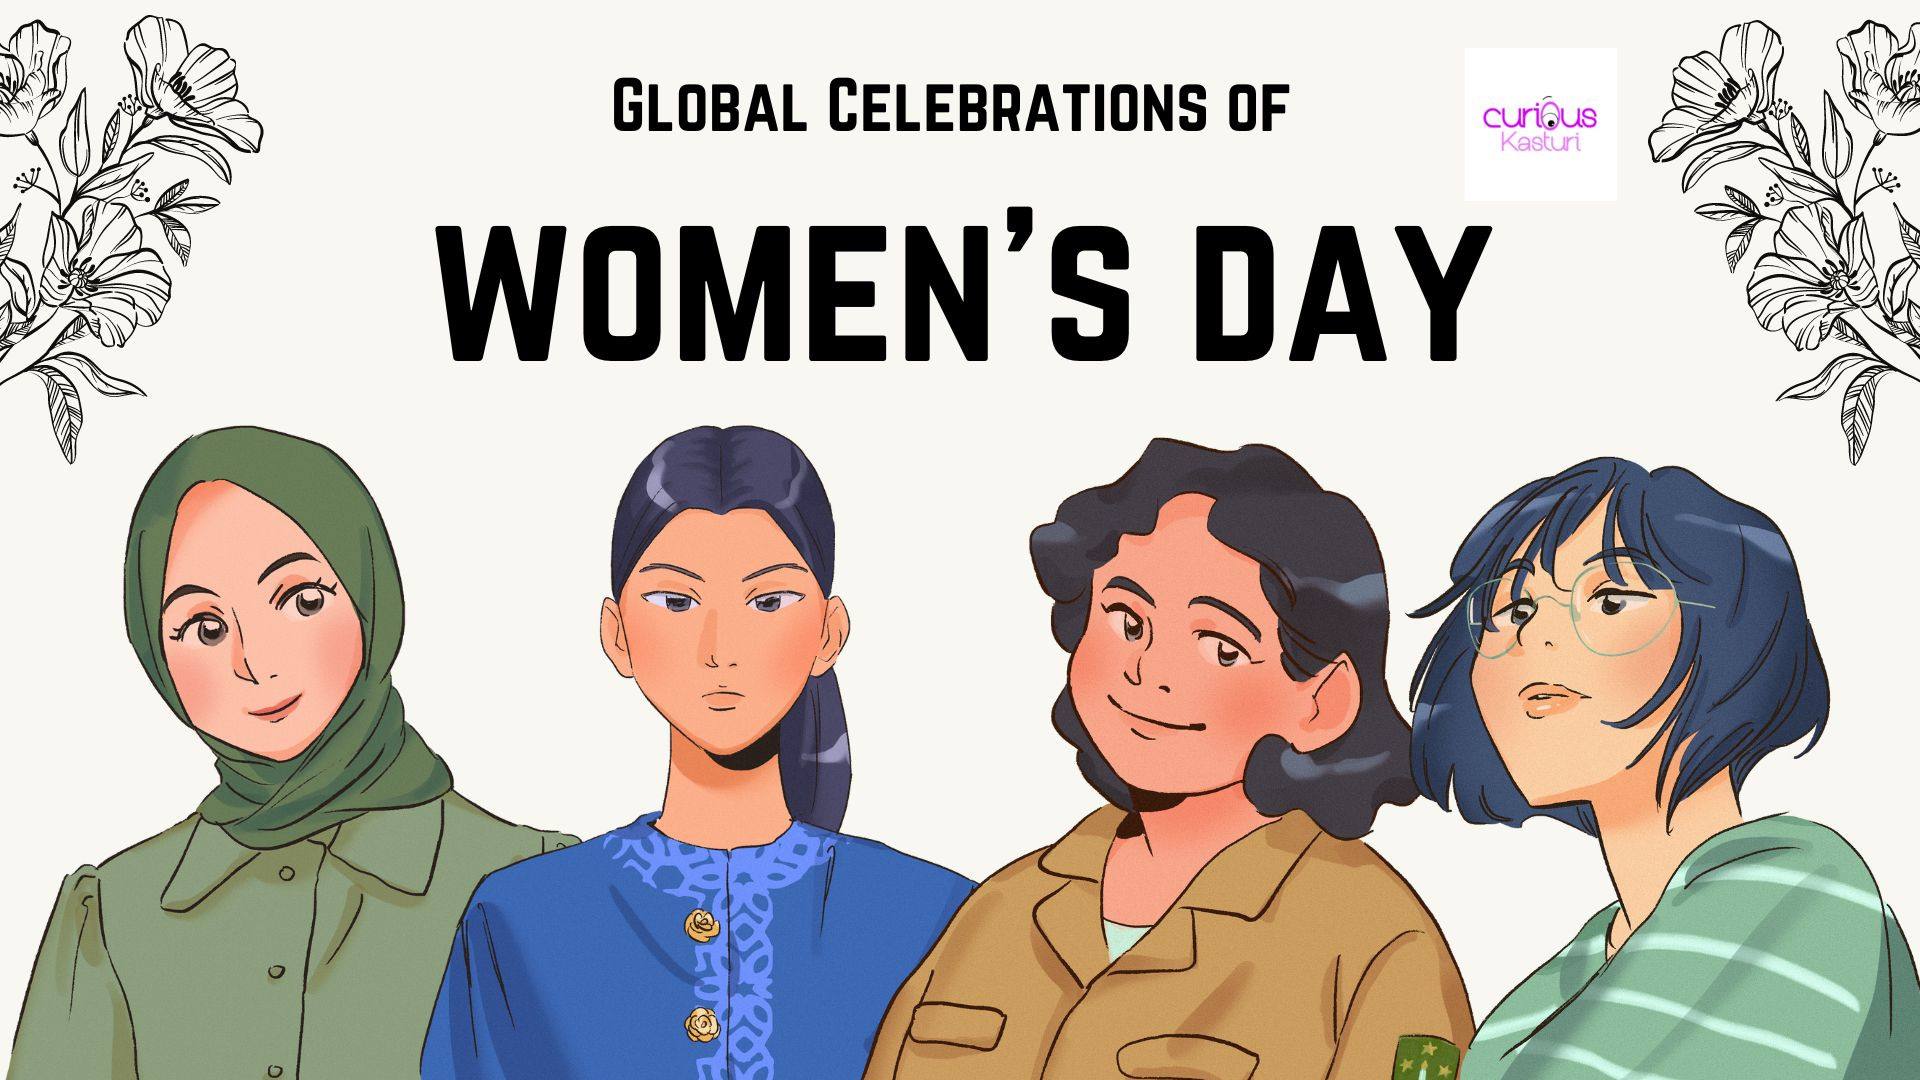 Global Celebrations of Women's Day